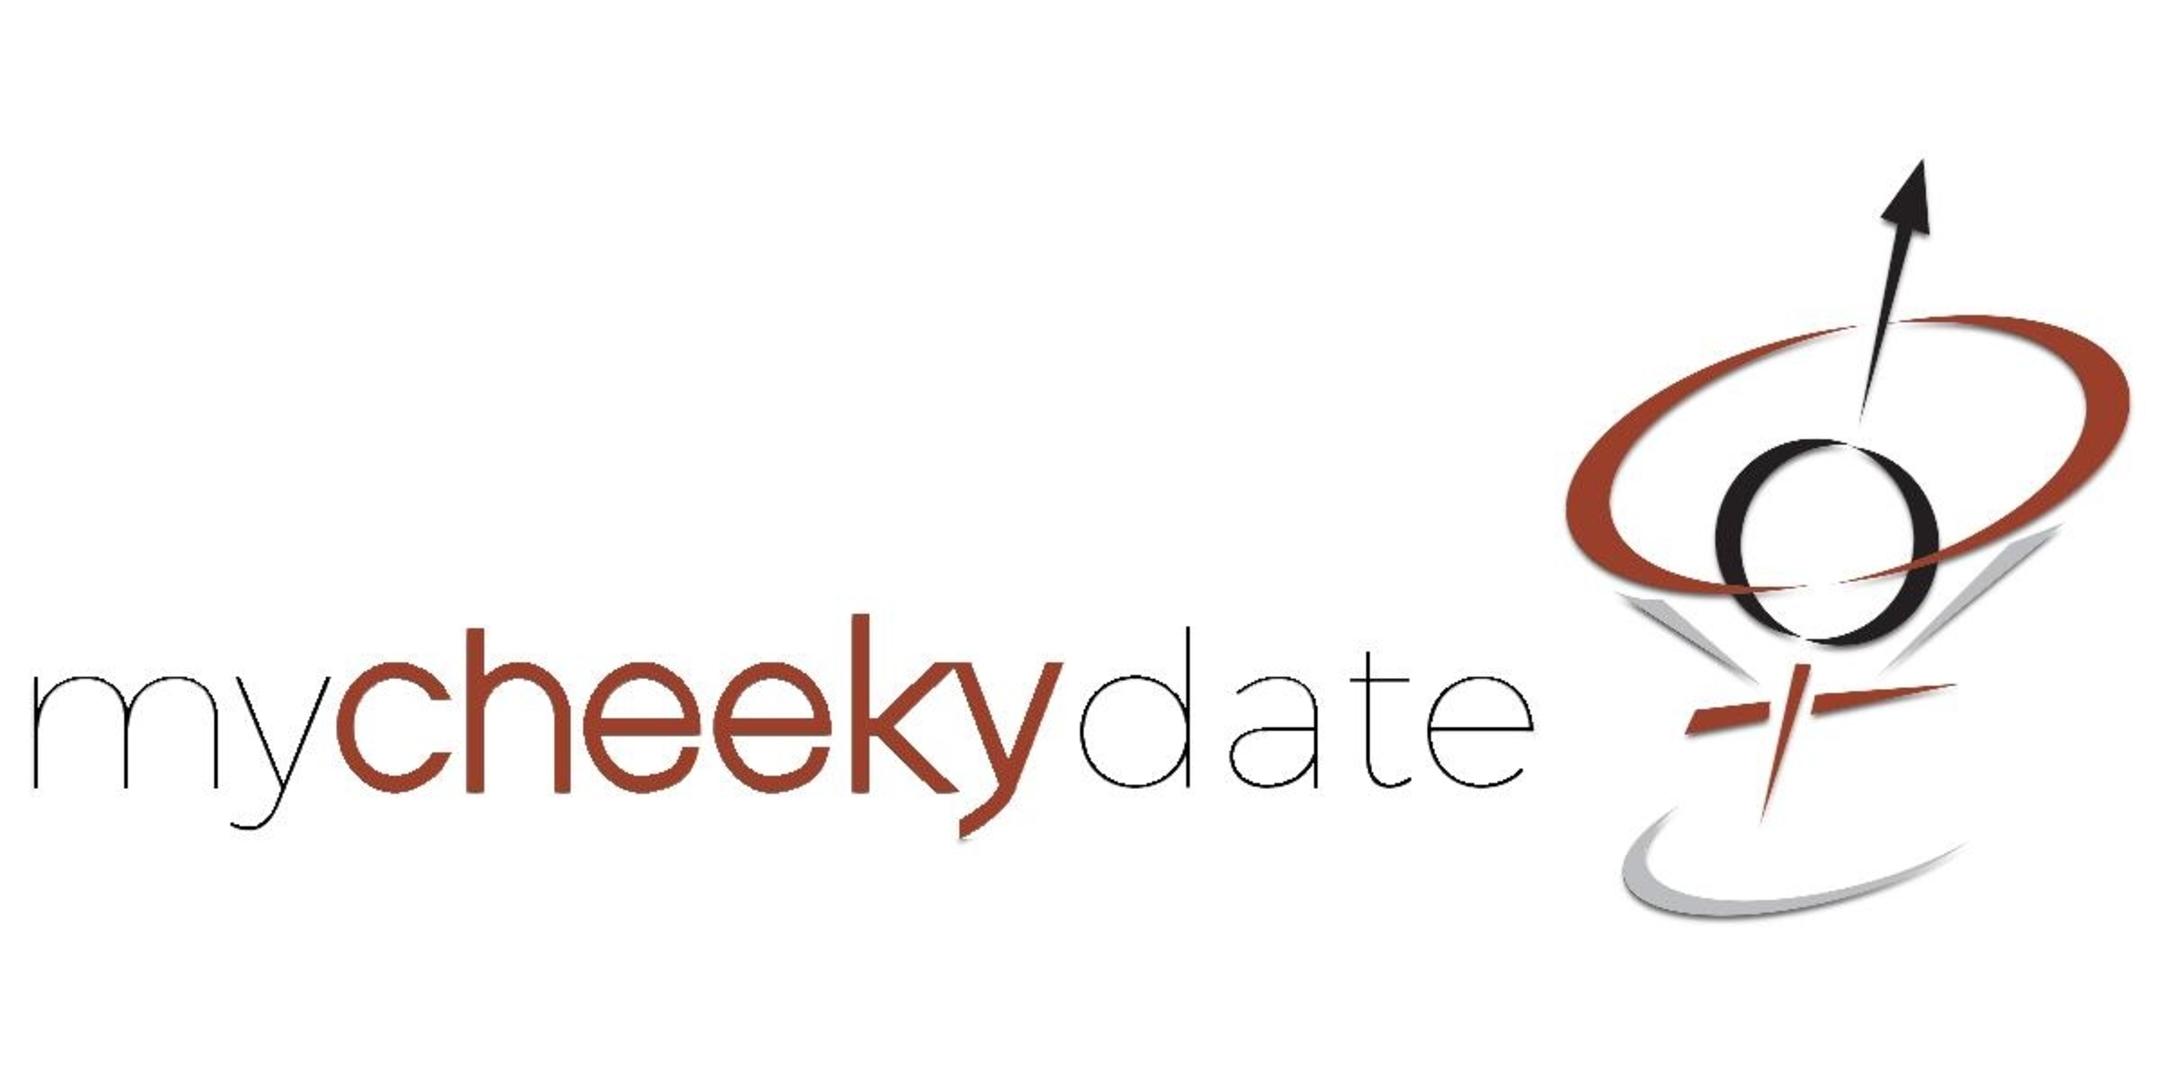 Speed Dating Houston | Let's Get Cheeky! | Night Event for Singles